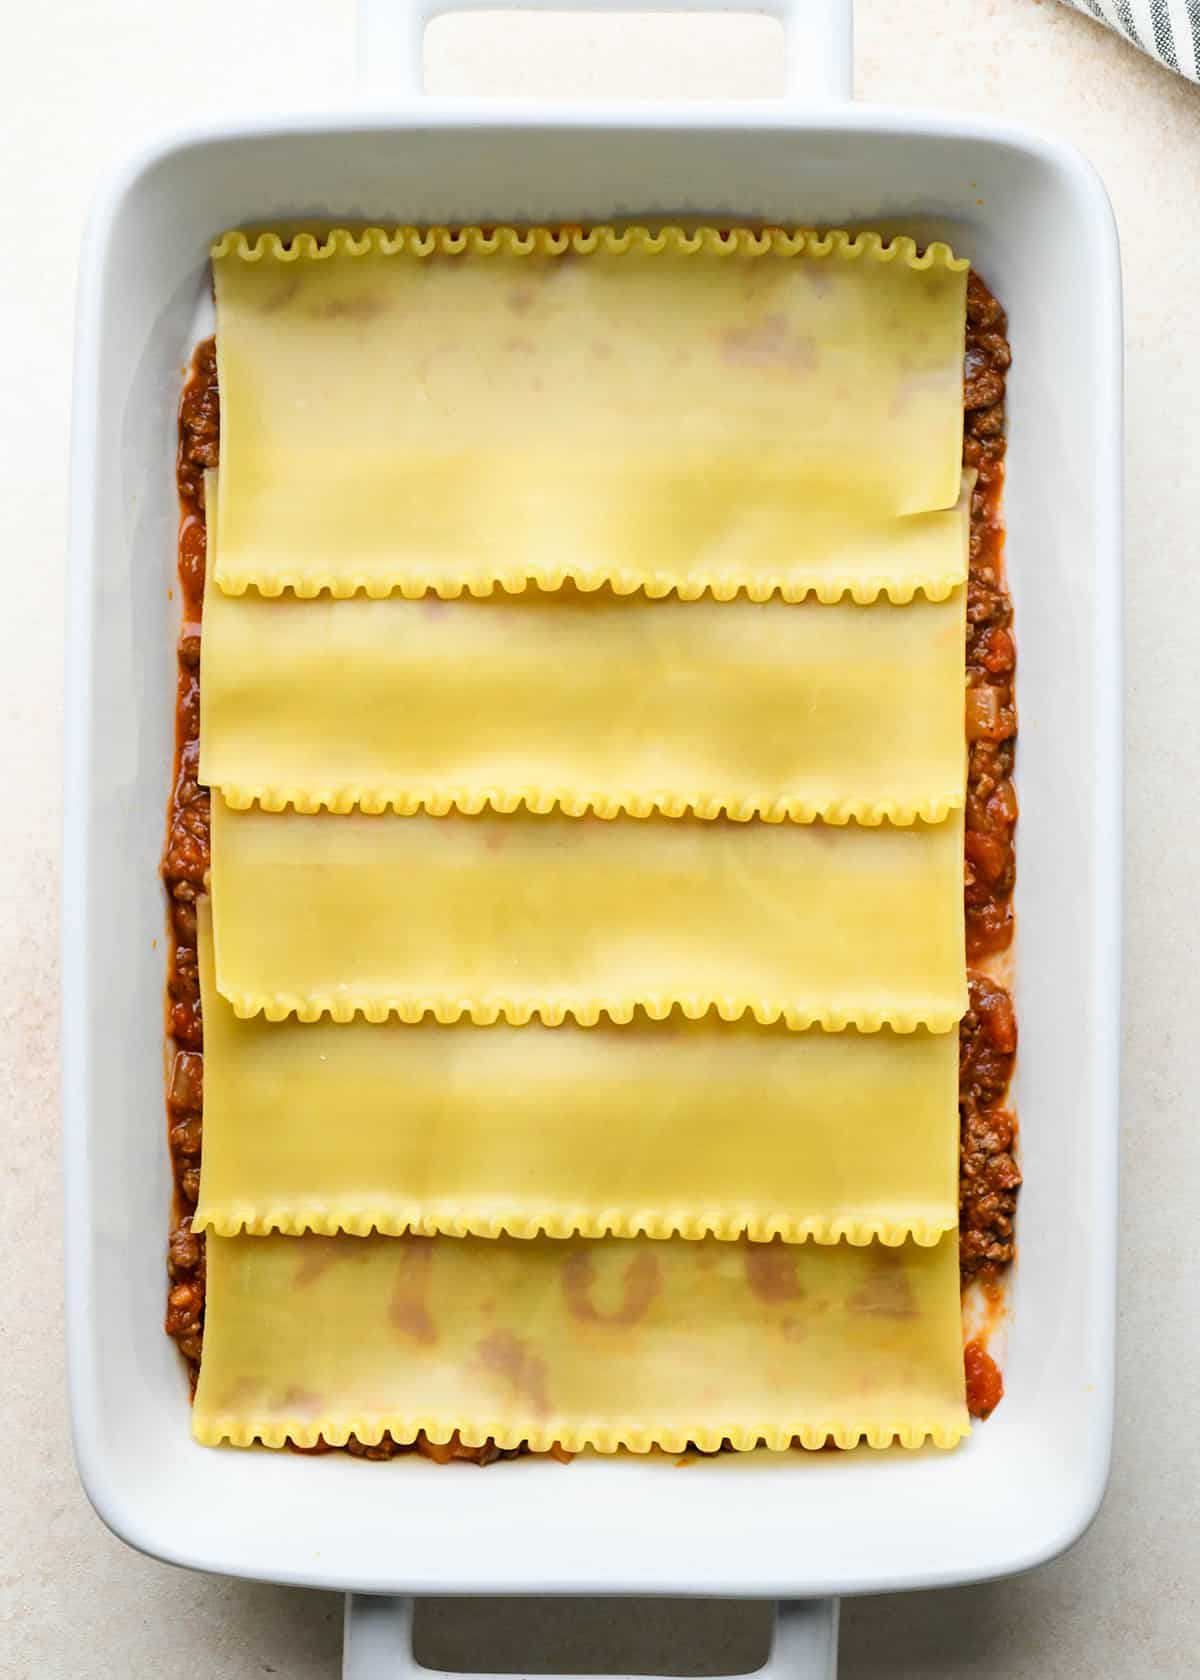 photo showing how to assemble beef lasagna - adding the noodles